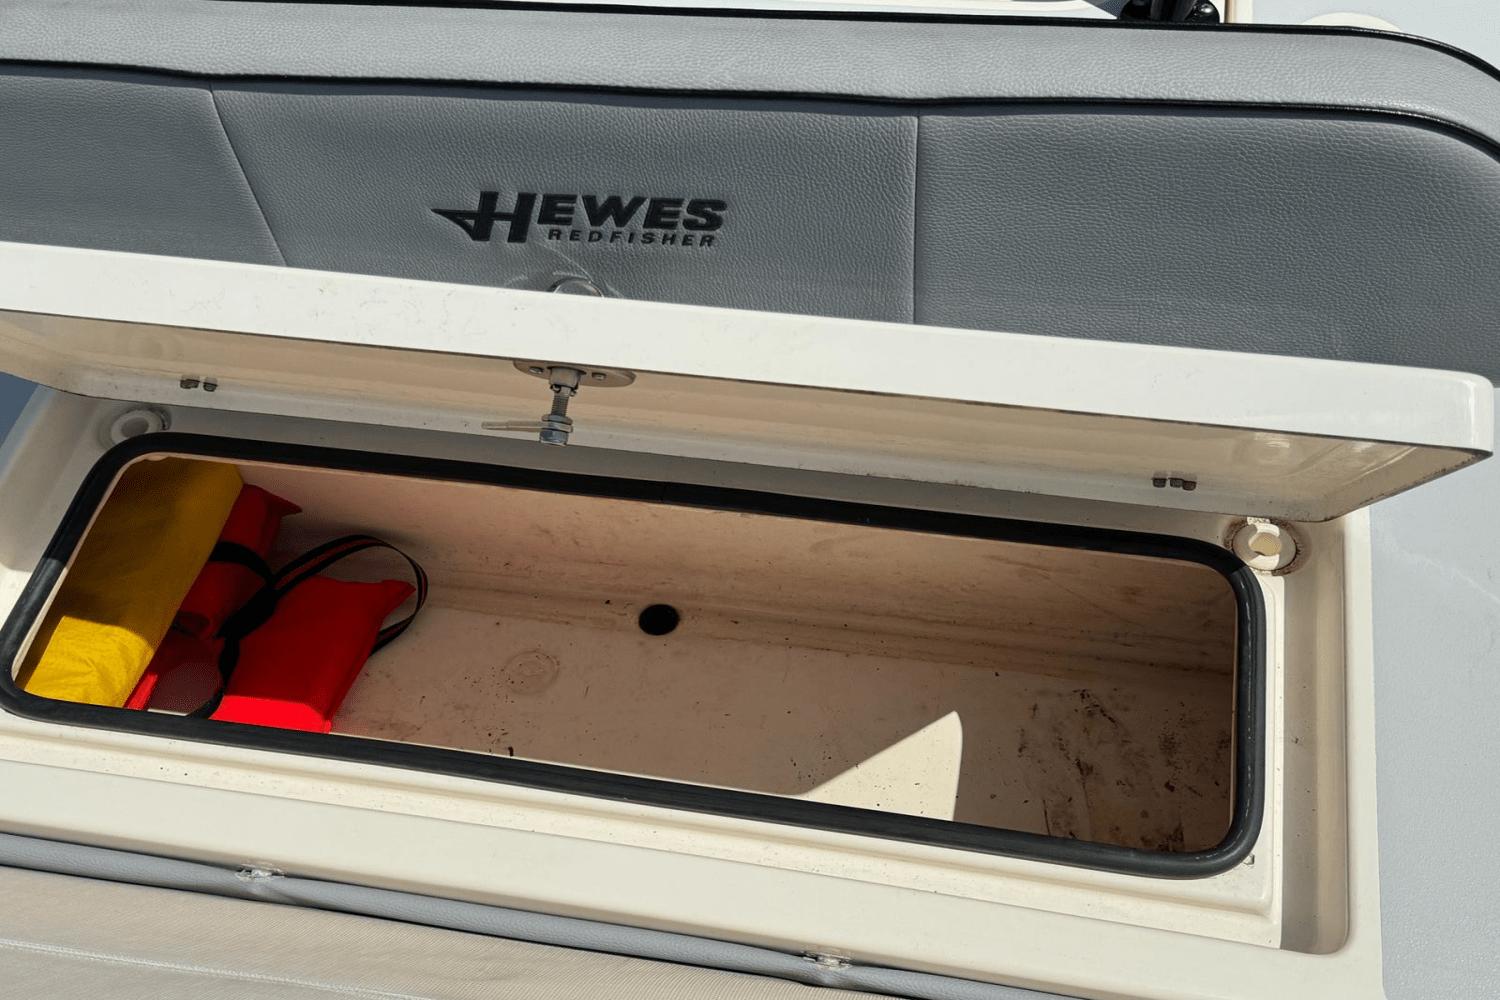 2019 Hewes Redfisher 18